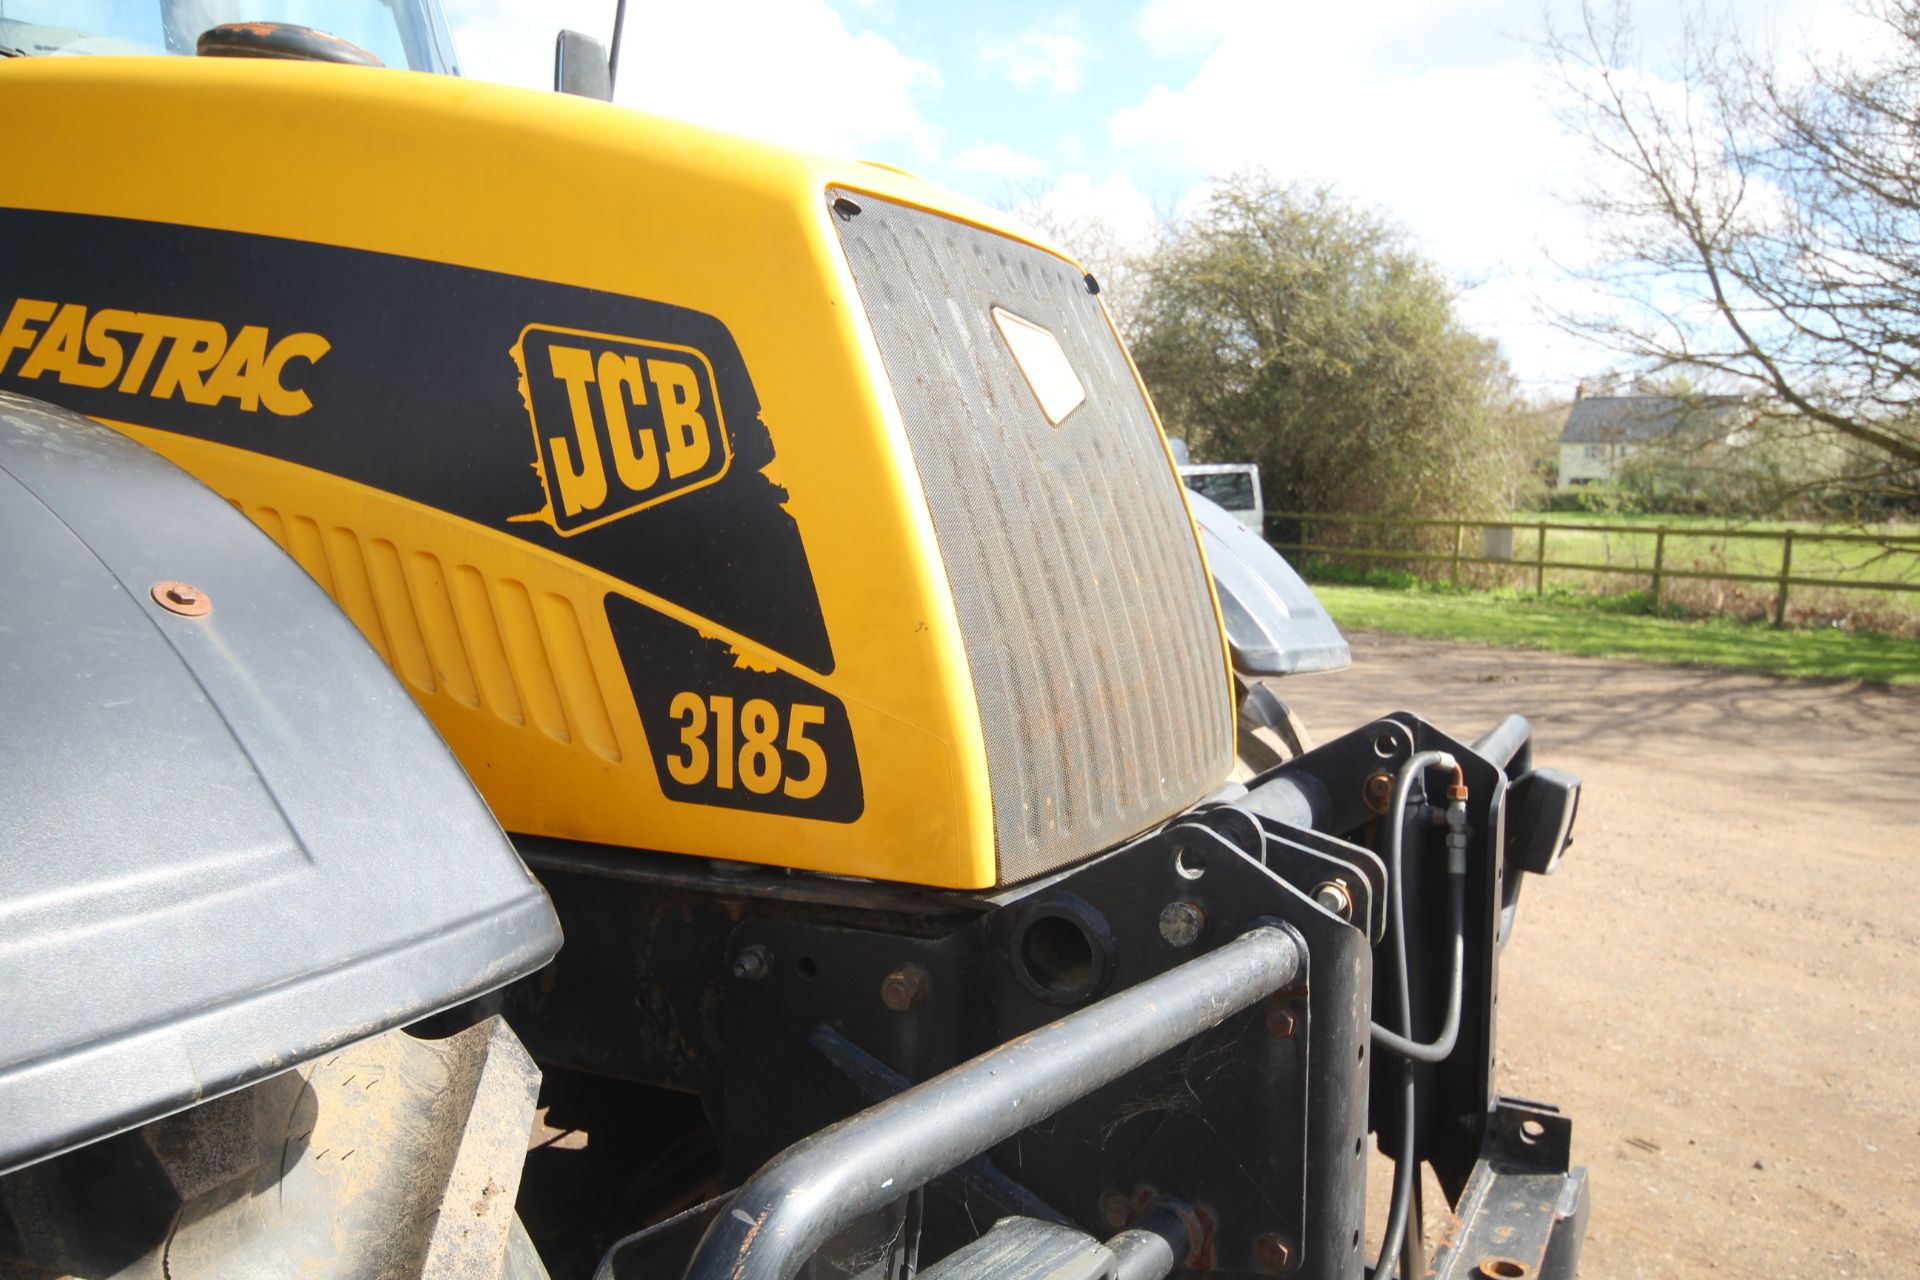 JCB Fastrac 3185 Autoshift 4WD tractor. Registration X642 AHT. Date of first registration 04/09/ - Image 51 of 71